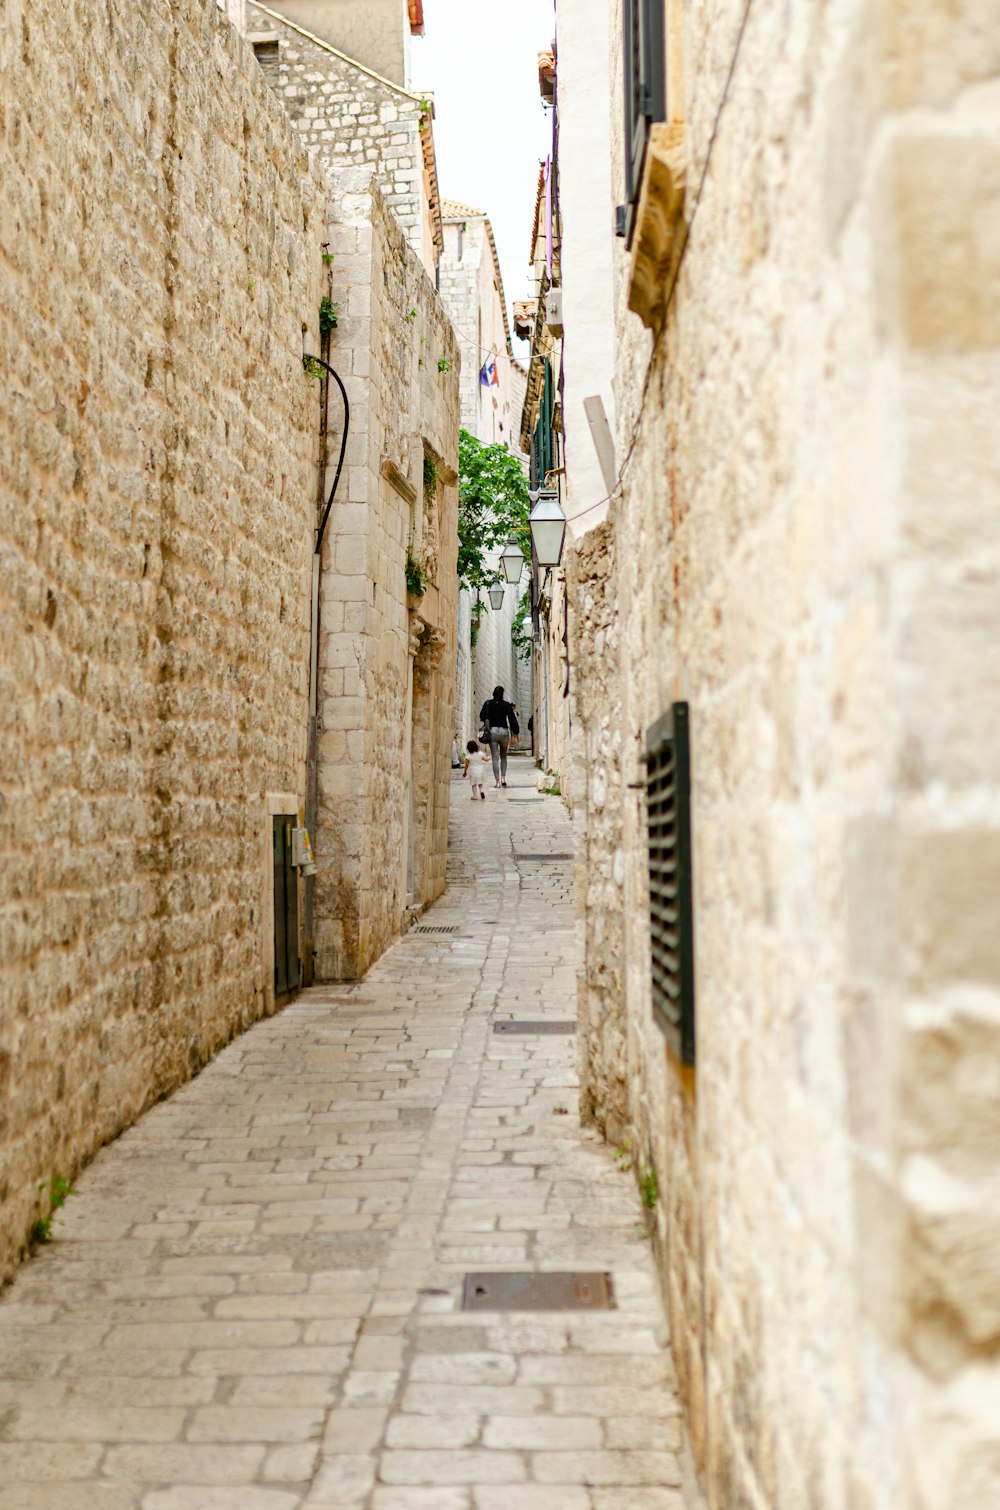 a narrow street with a person walking down it